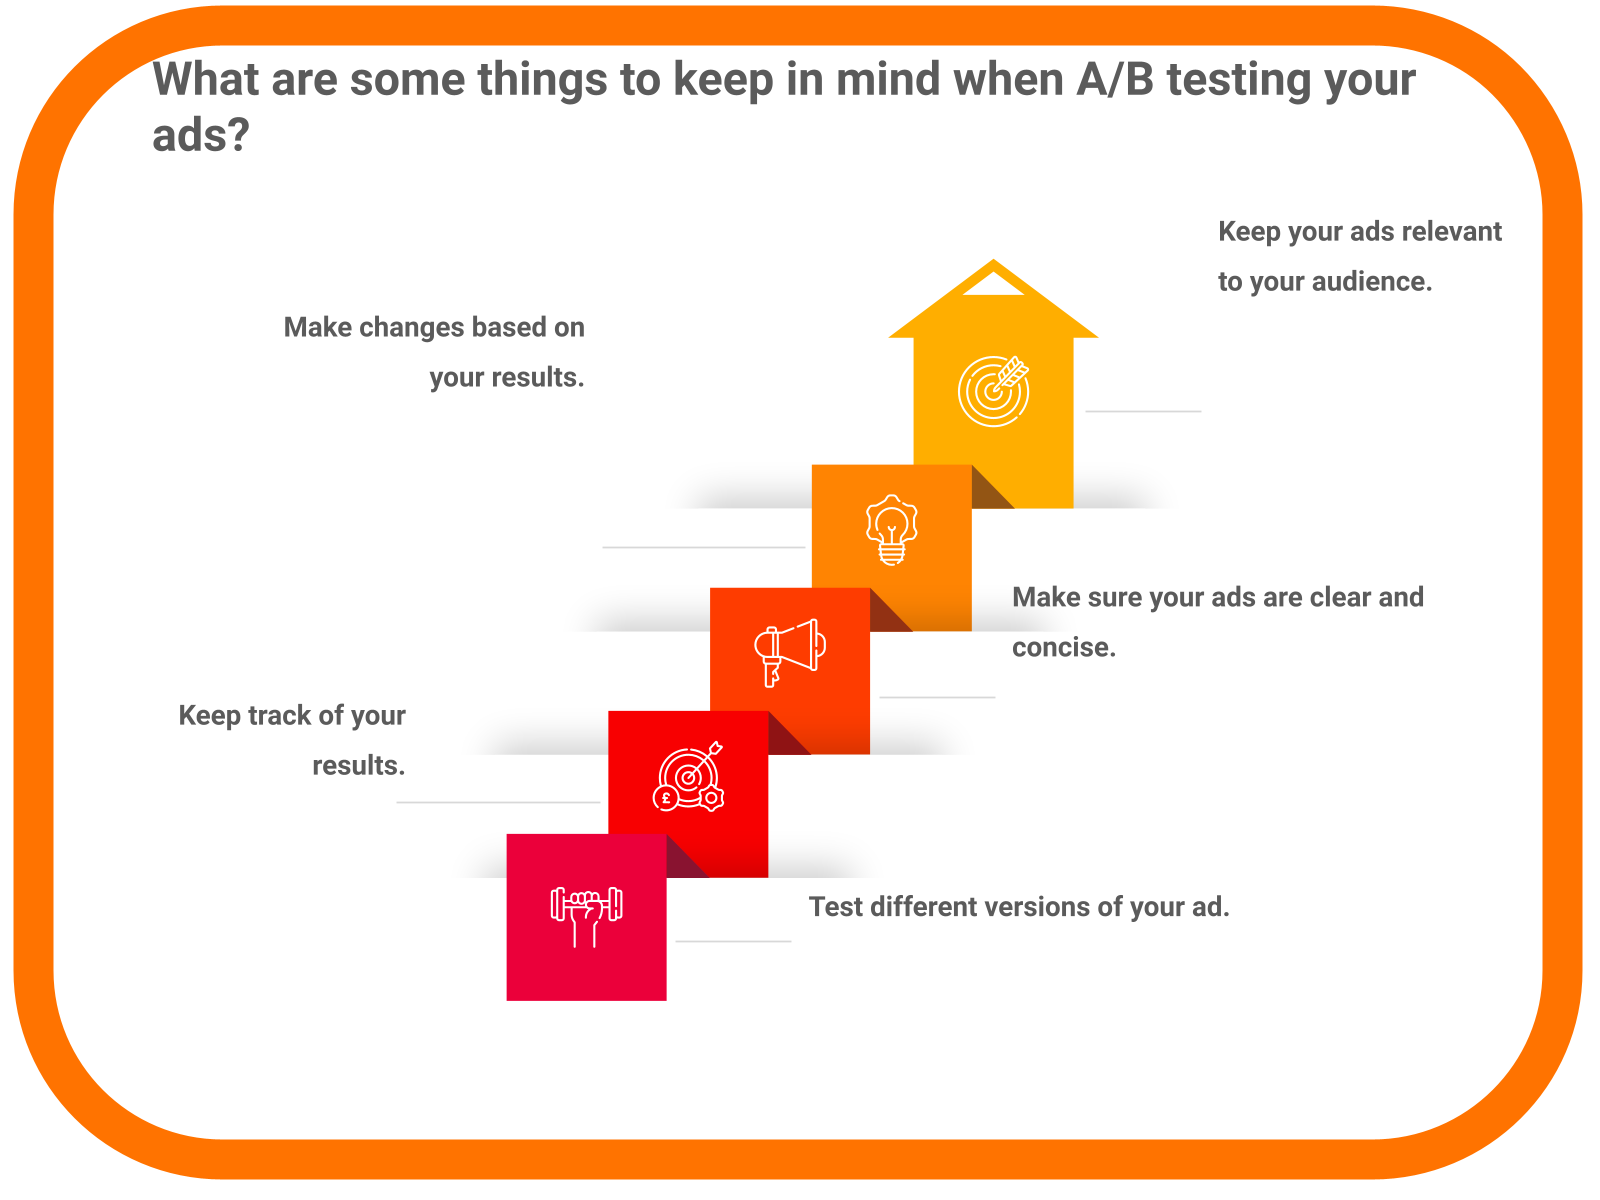 What are some things to keep in mind when A/B testing your ads?